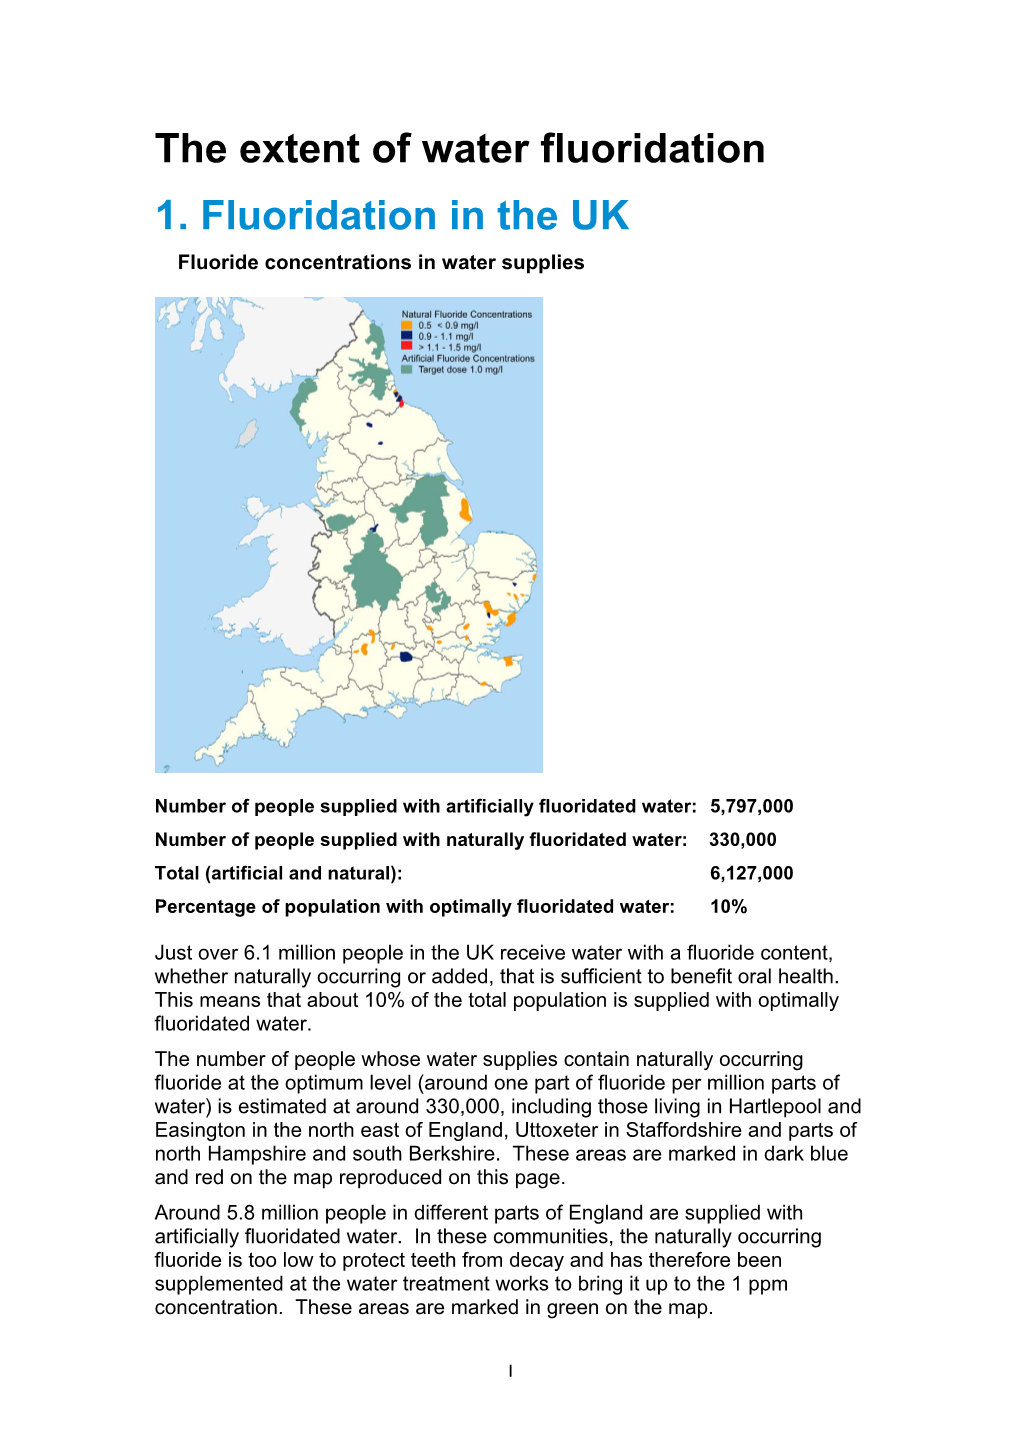 The Extent of Water Fluoridation 1. Fluoridation in the UK